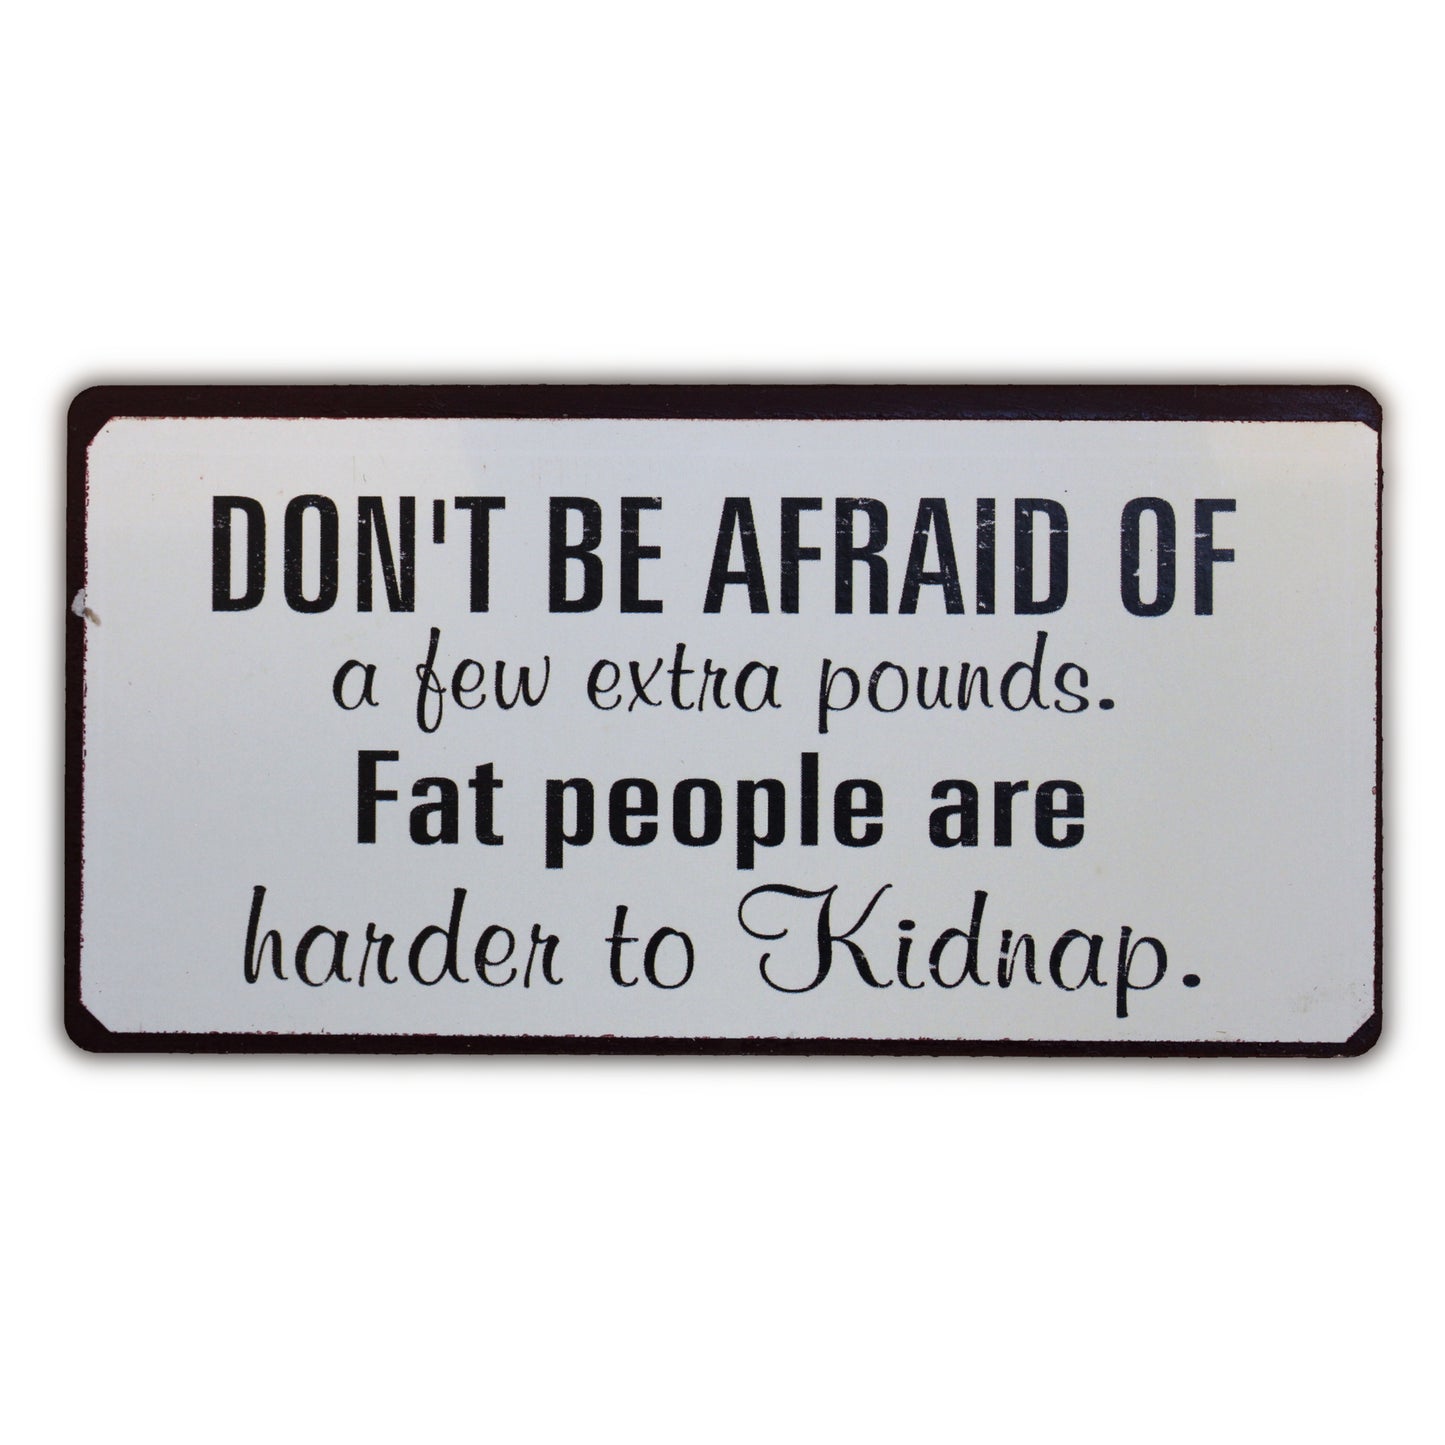 Magnet: Don't be afraid of a few extra pounds. Fat people are harder to kidnap.